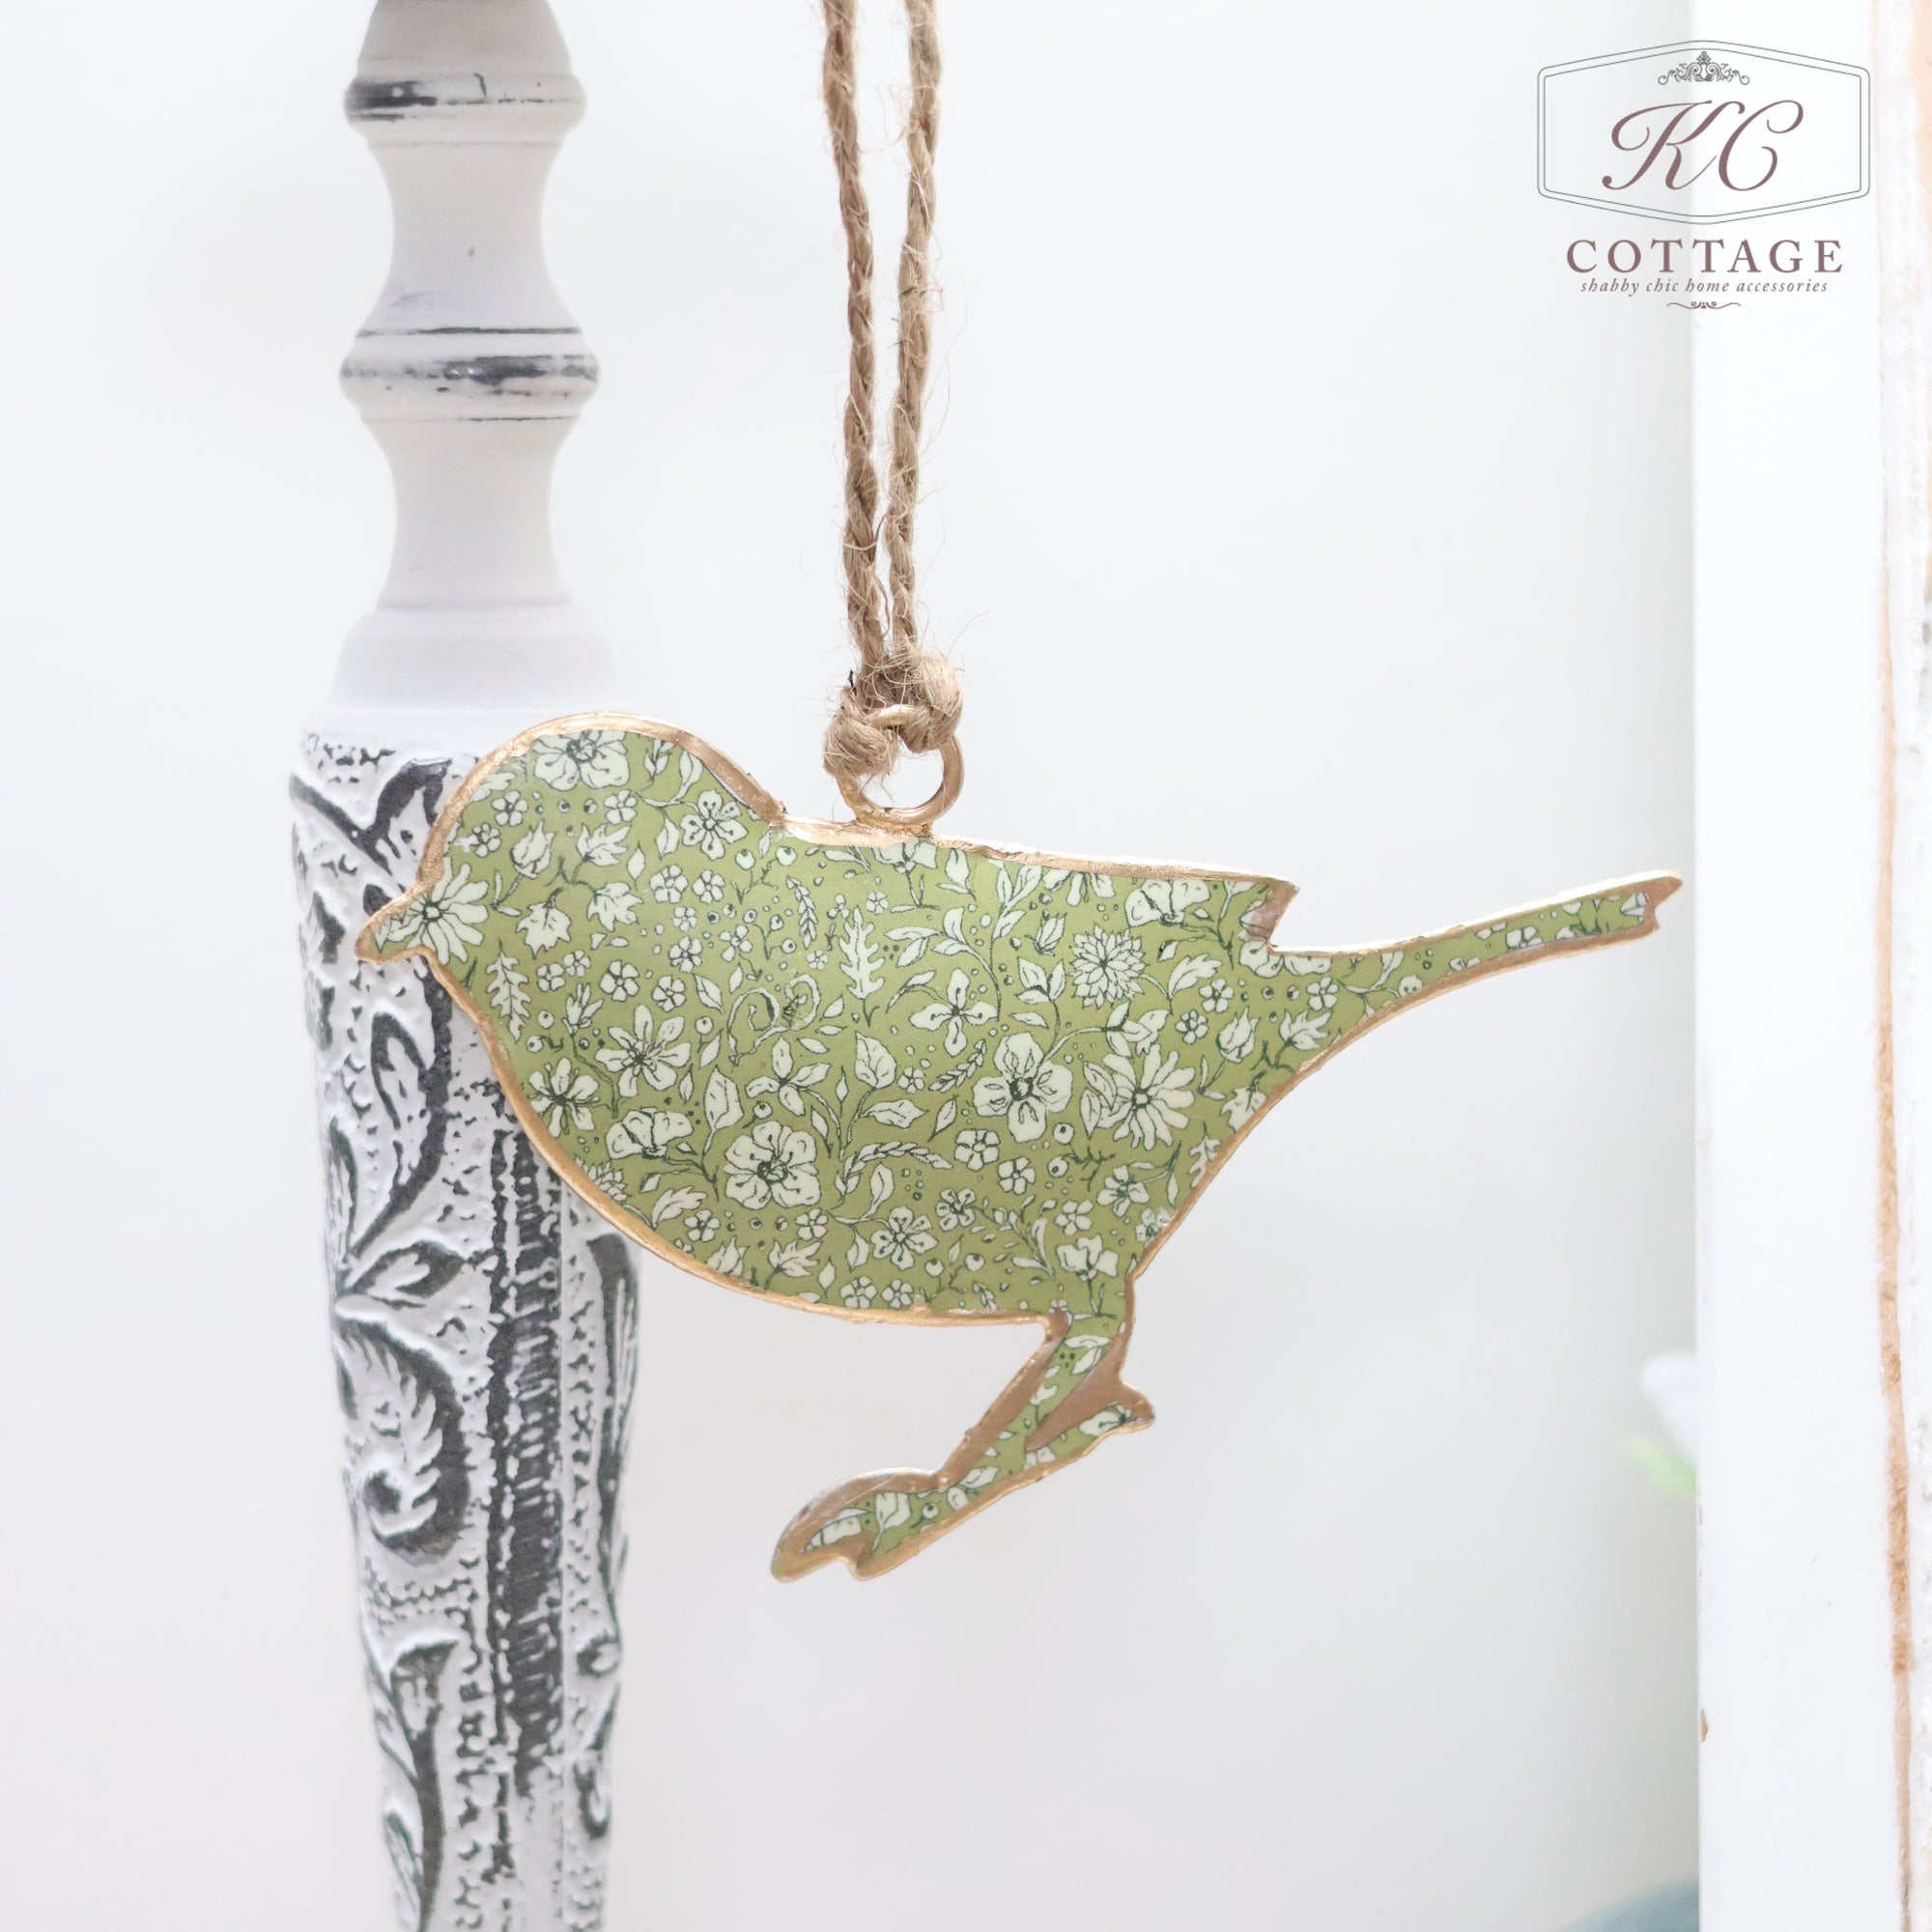 A Light Green Floral Metal Hanging Bird with a floral pattern hangs from a twine loop, adding charm to your home decor. Positioned next to a white and black intricately designed pillar, the bird features a green background with white flowers.